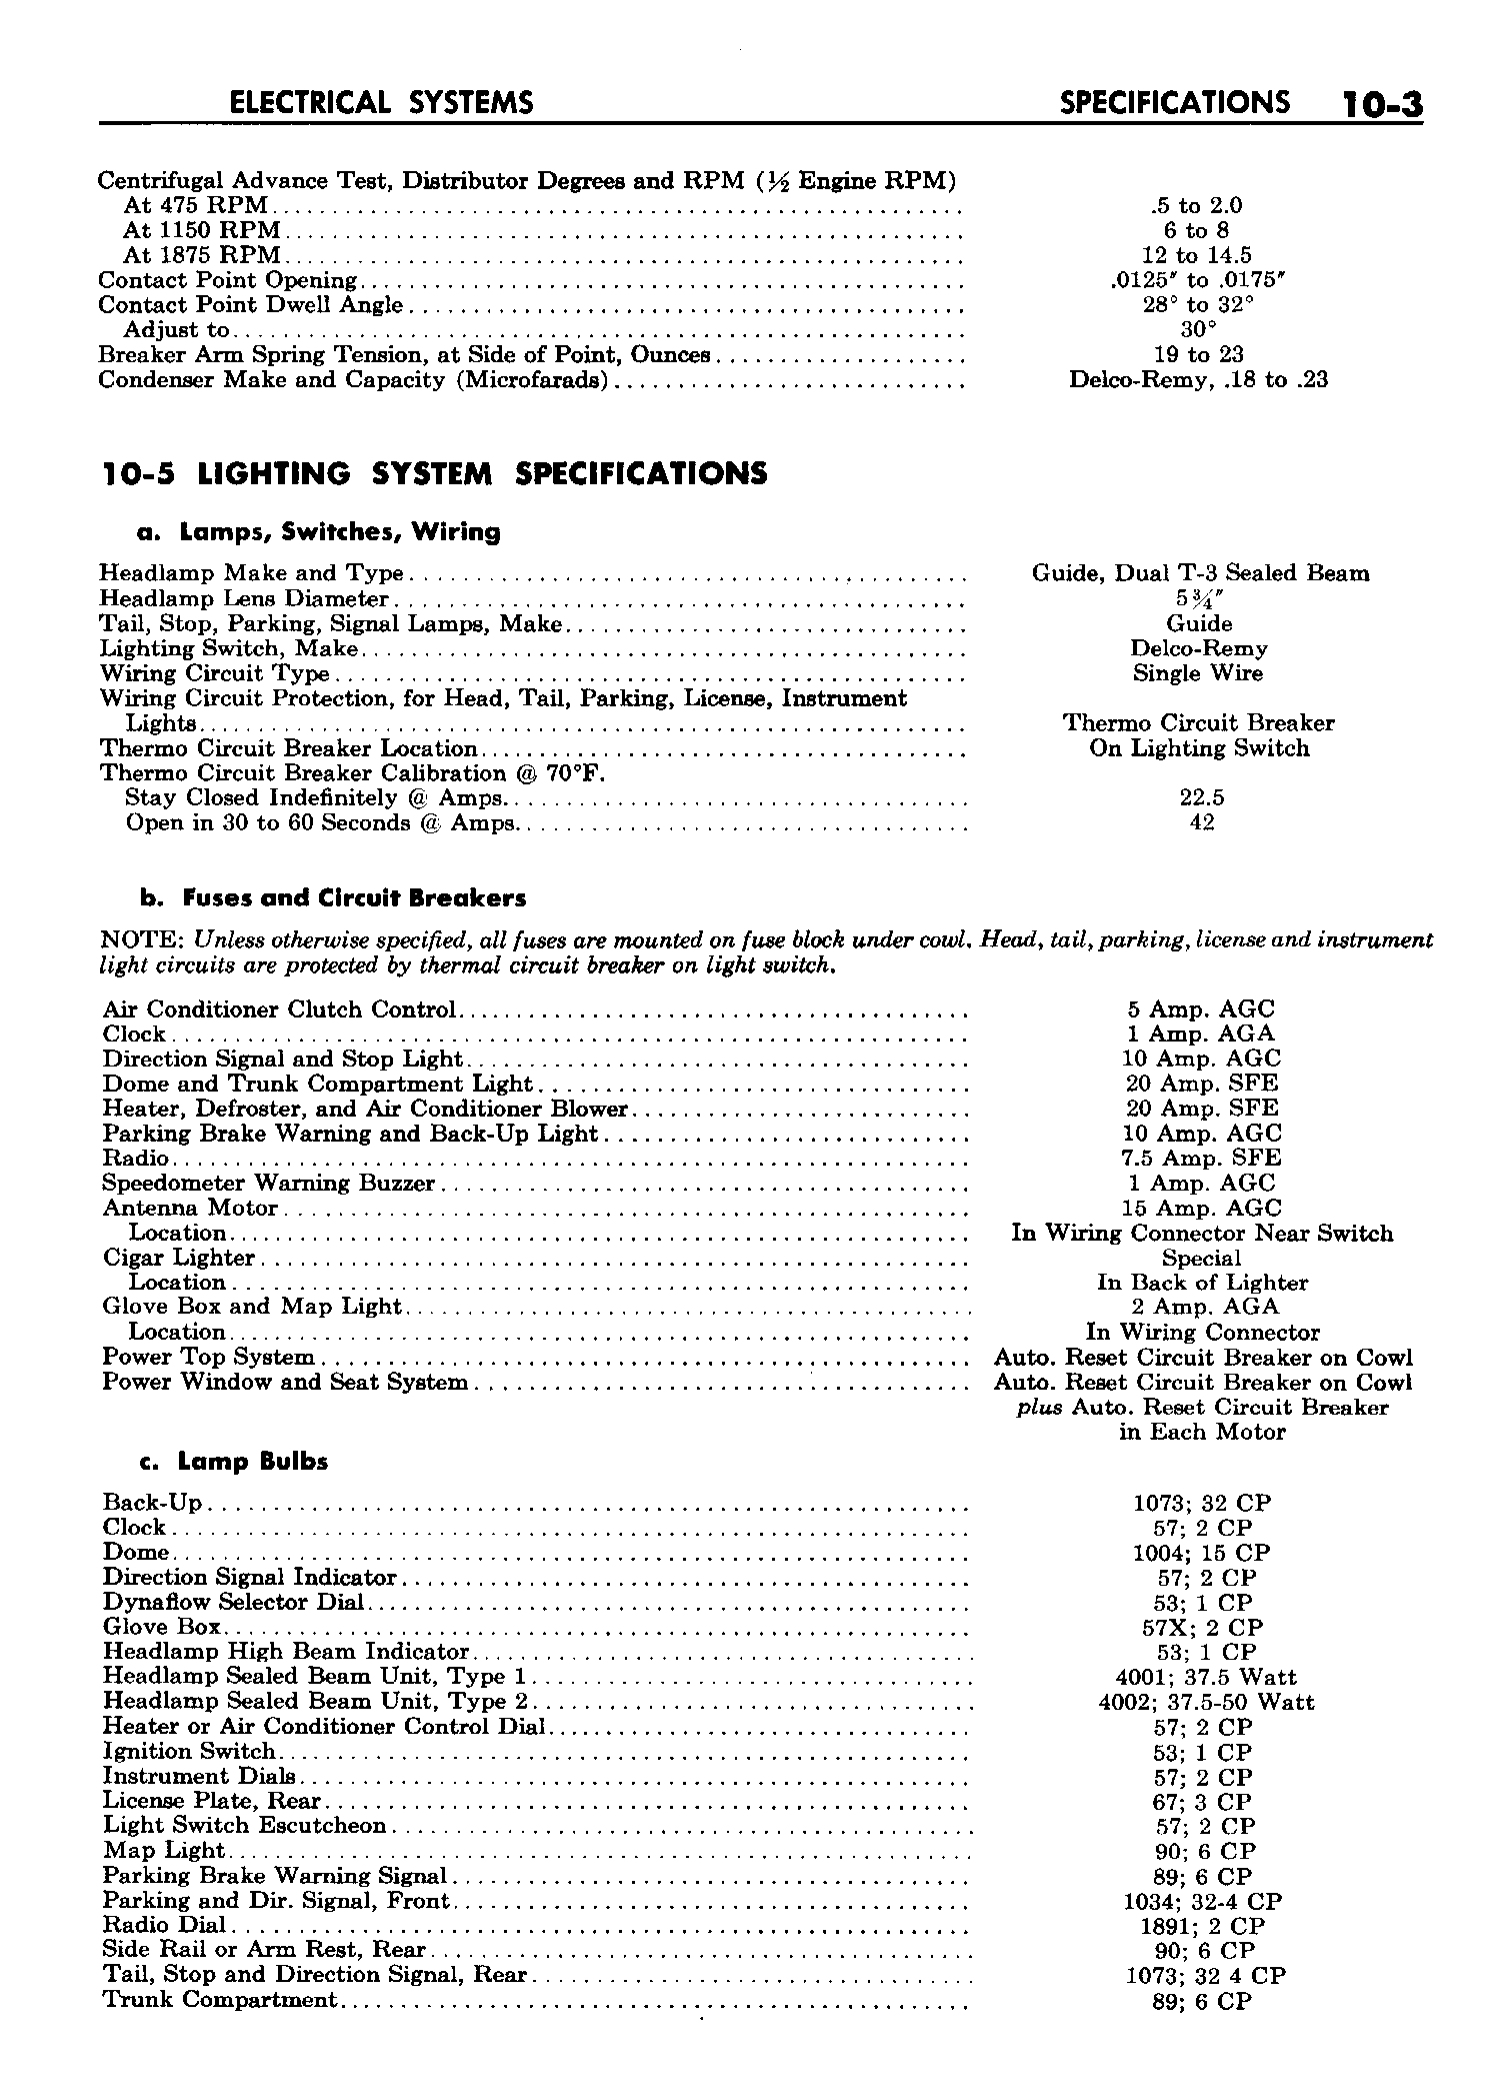 n_11 1958 Buick Shop Manual - Electrical Systems_3.jpg